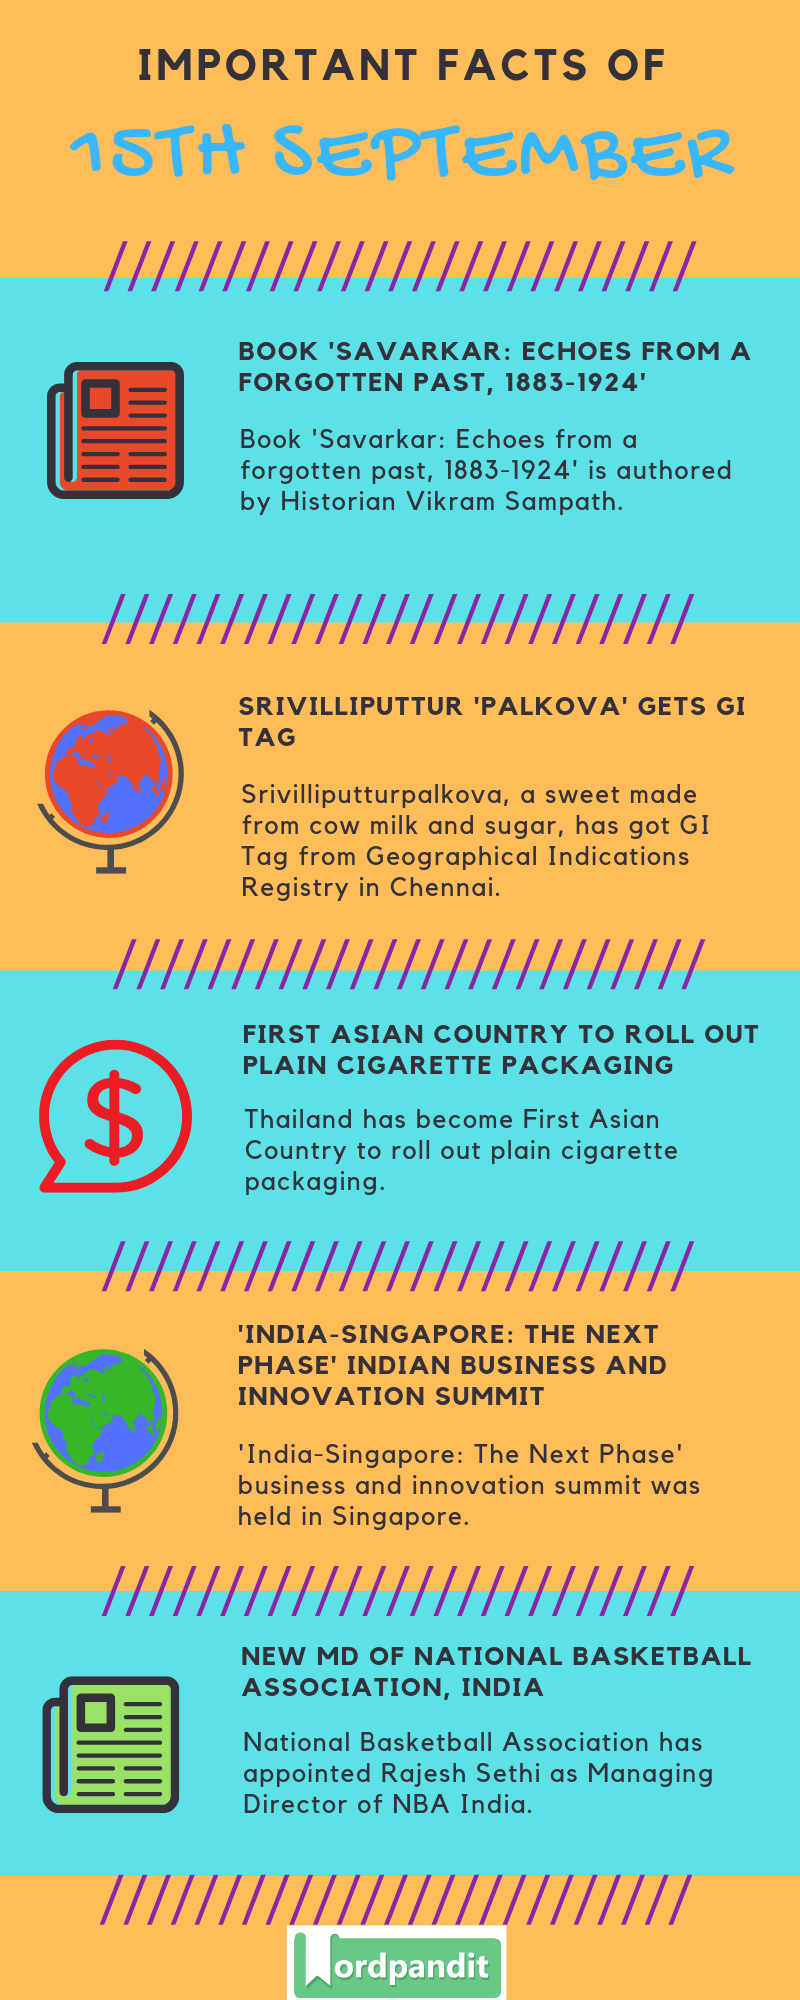 Daily Current Affairs 15 September 2019 Current Affairs Quiz 15 September 2019 Current Affairs Infographic